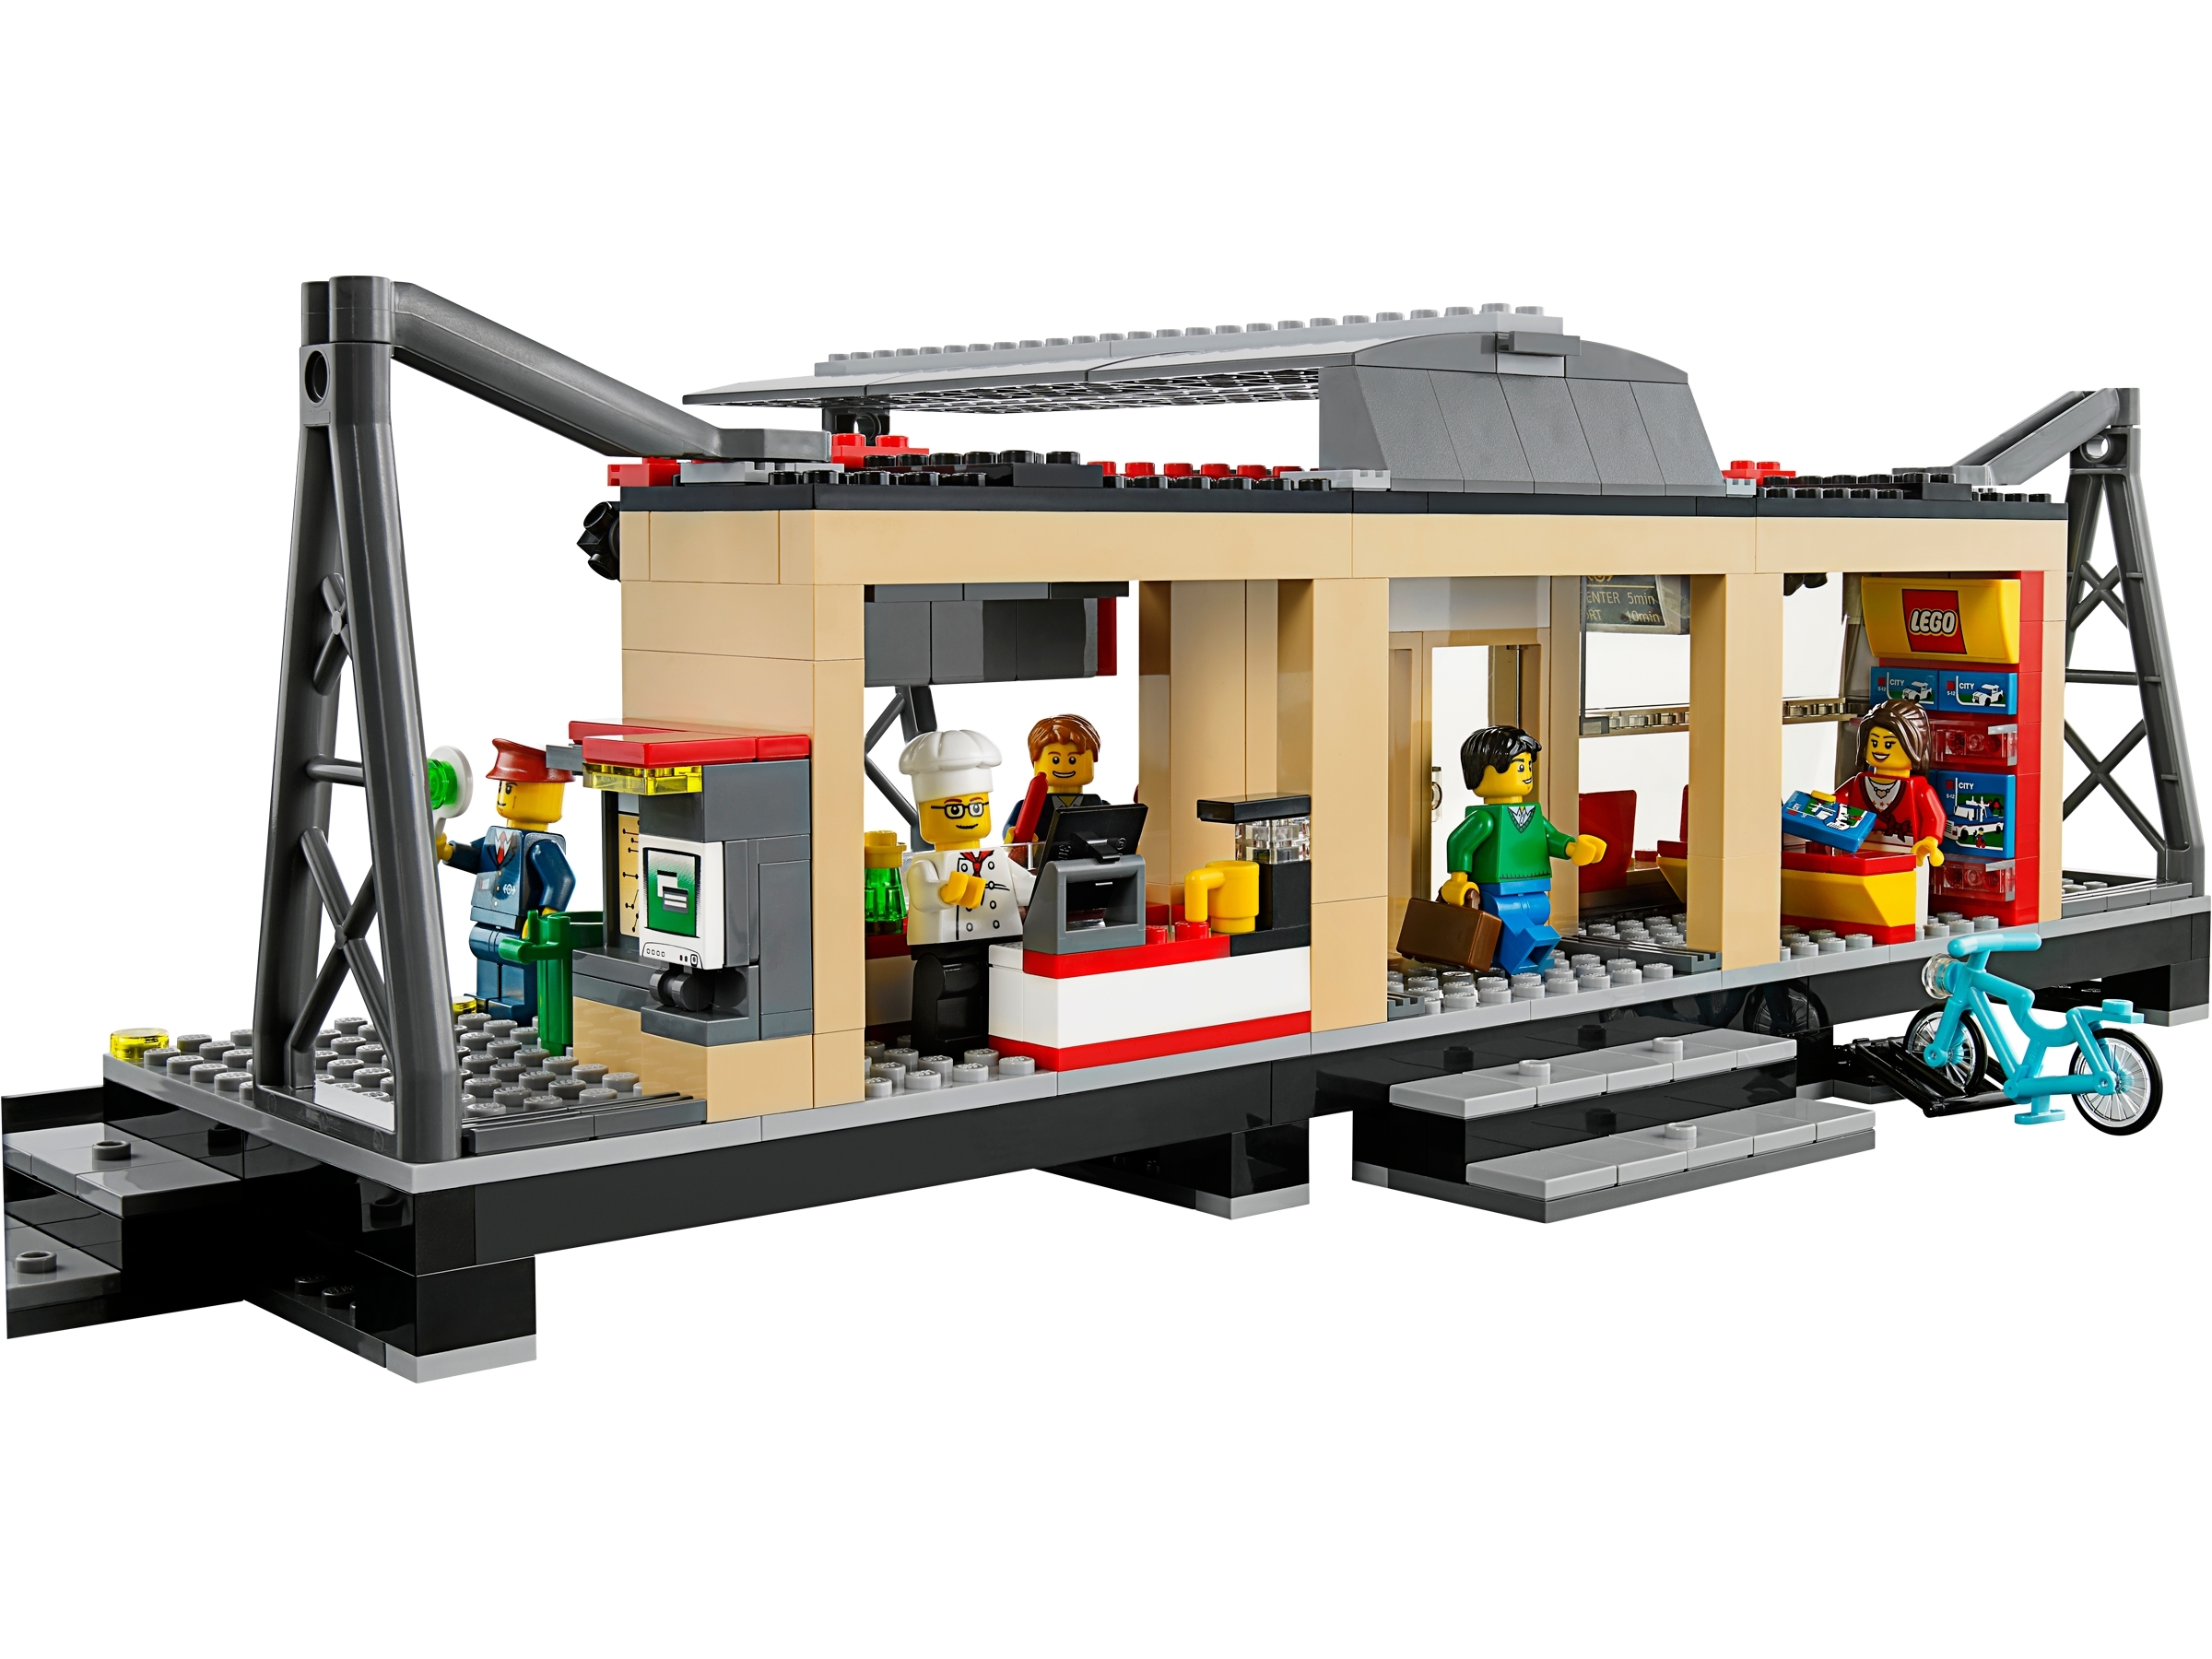 Train 60050 | Other Buy at the Official LEGO® Shop US